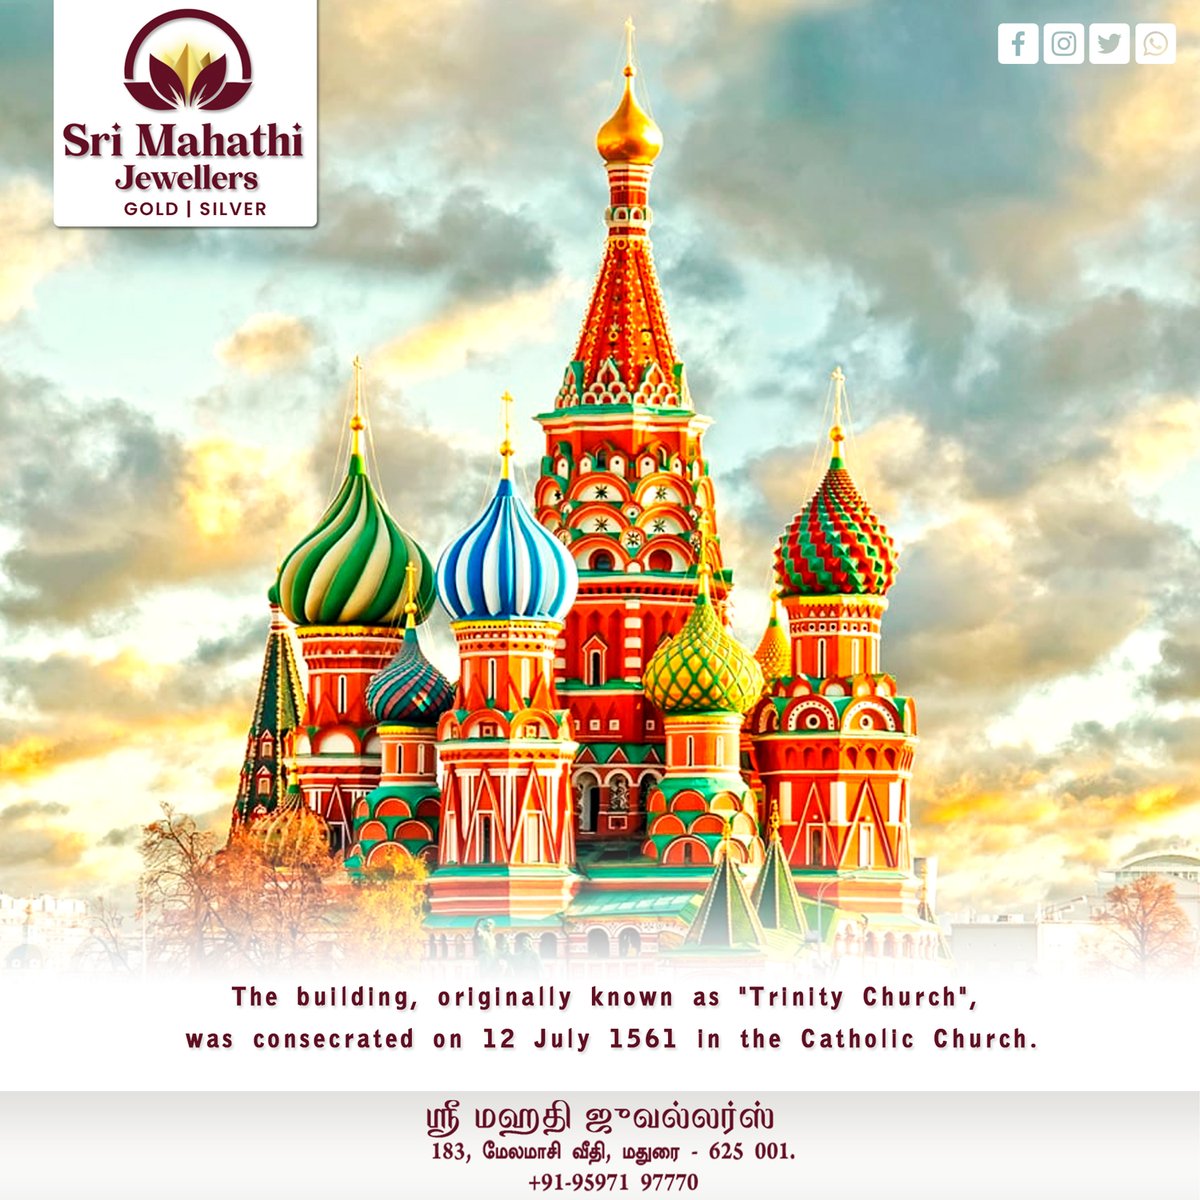 The building, originally known as 'Trinity Church', was consecrated on 12 July 1561 in the Catholic Church.

#trinitychurch #catholicchruch #catholic #12july #1561 #historyintoday #todayinhistory #SriMahathiJewellers #SriMahathiJewellersMadurai